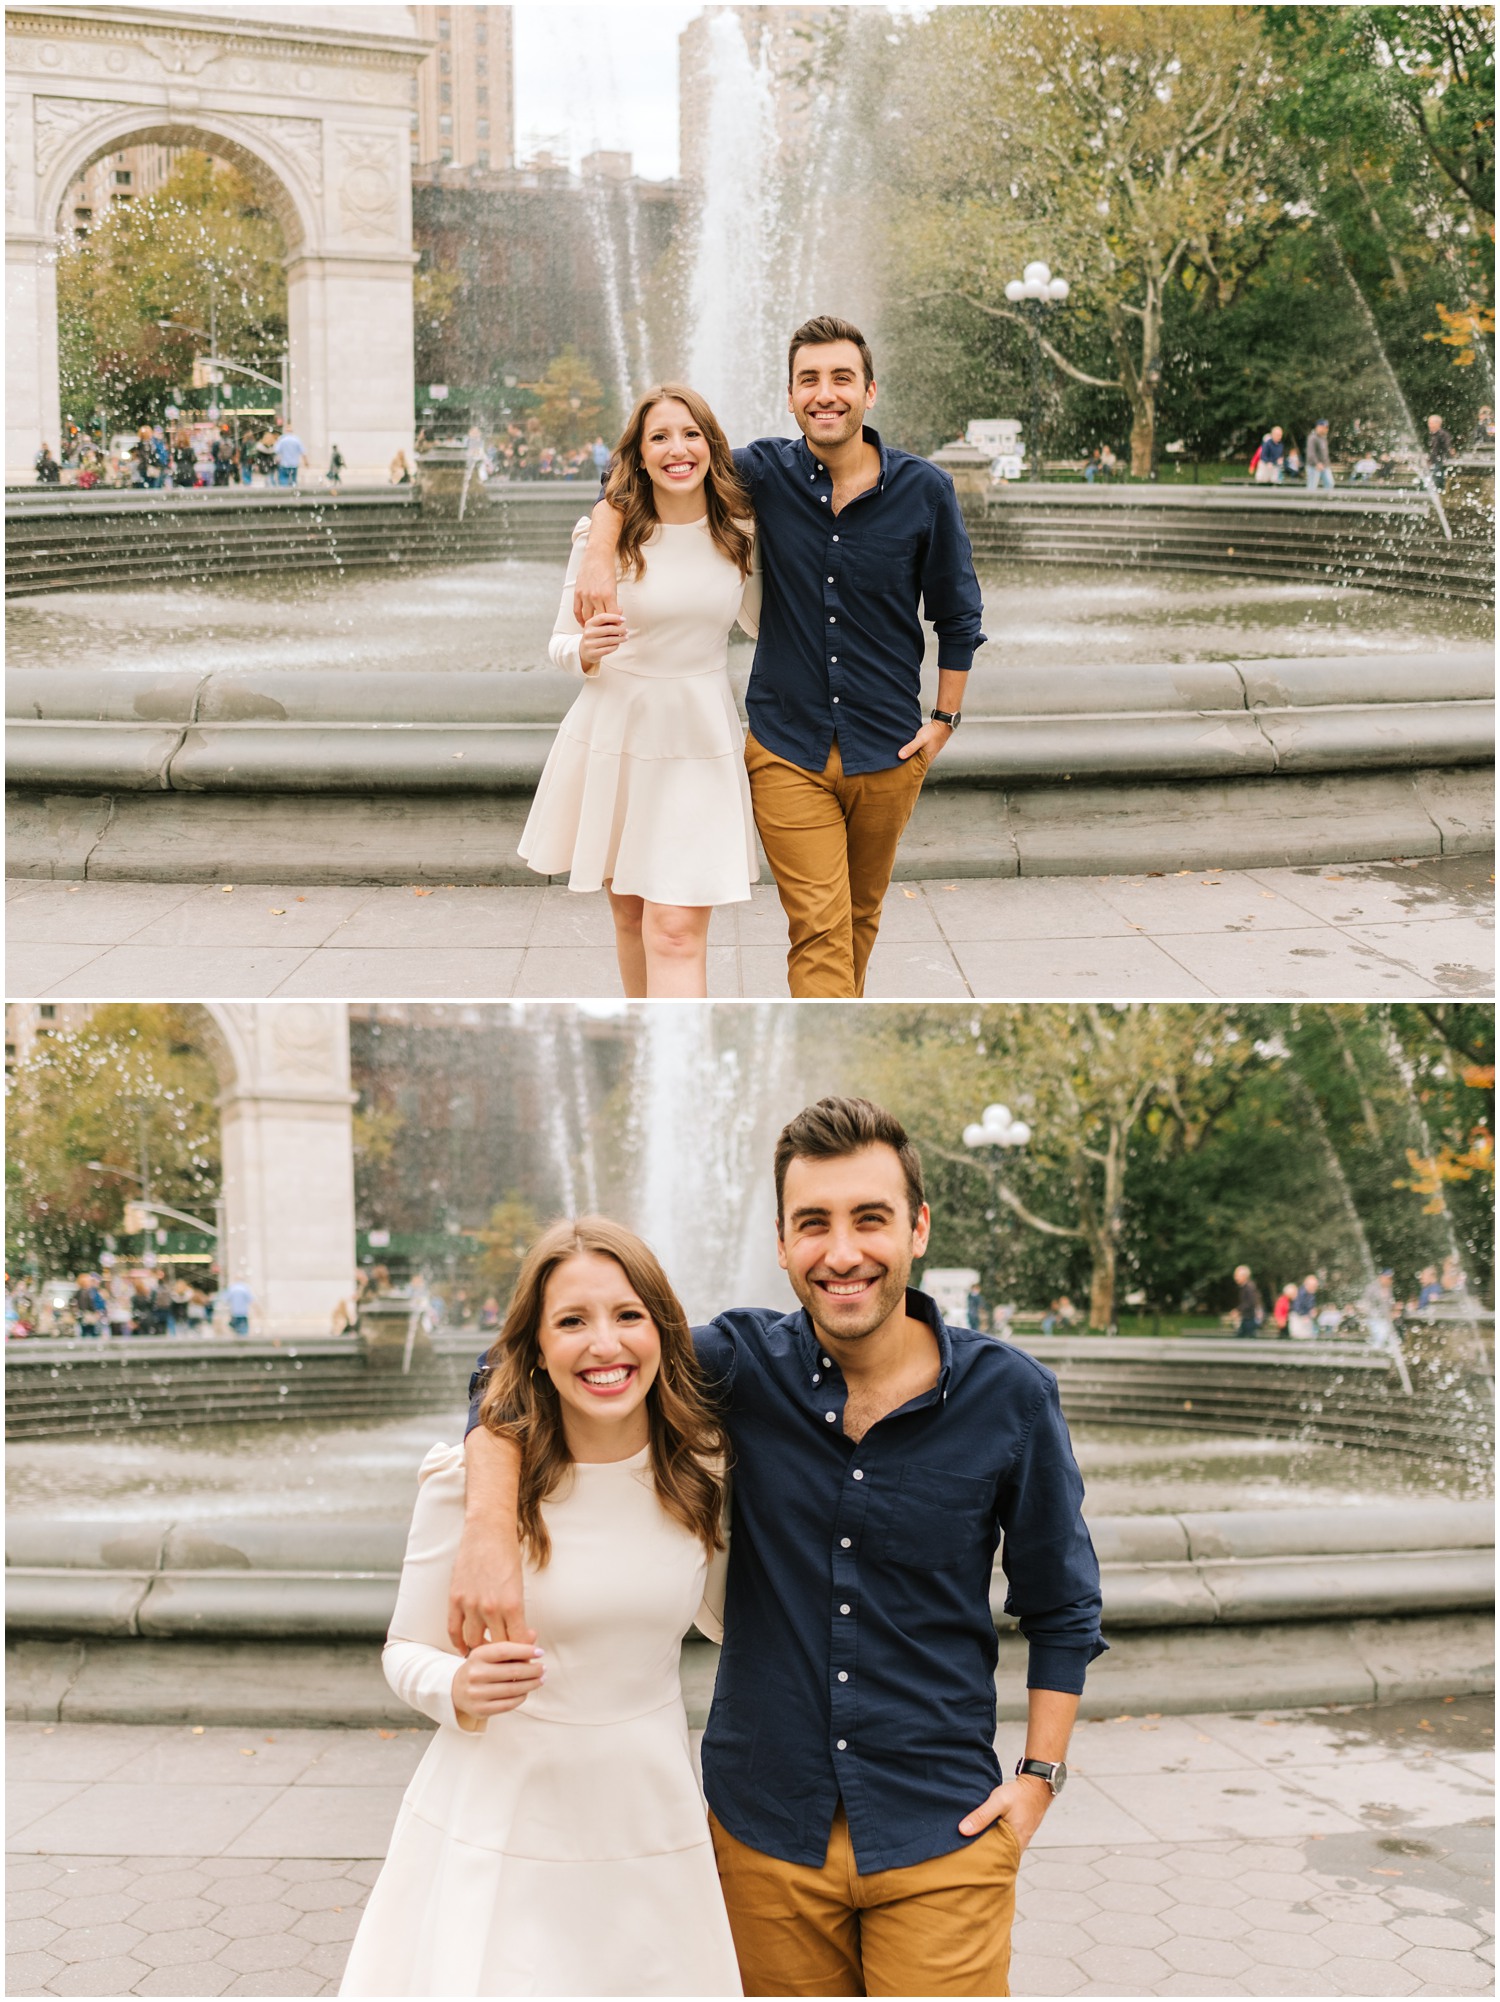 New York City couple poses by fountain in Washington Park during engagement session